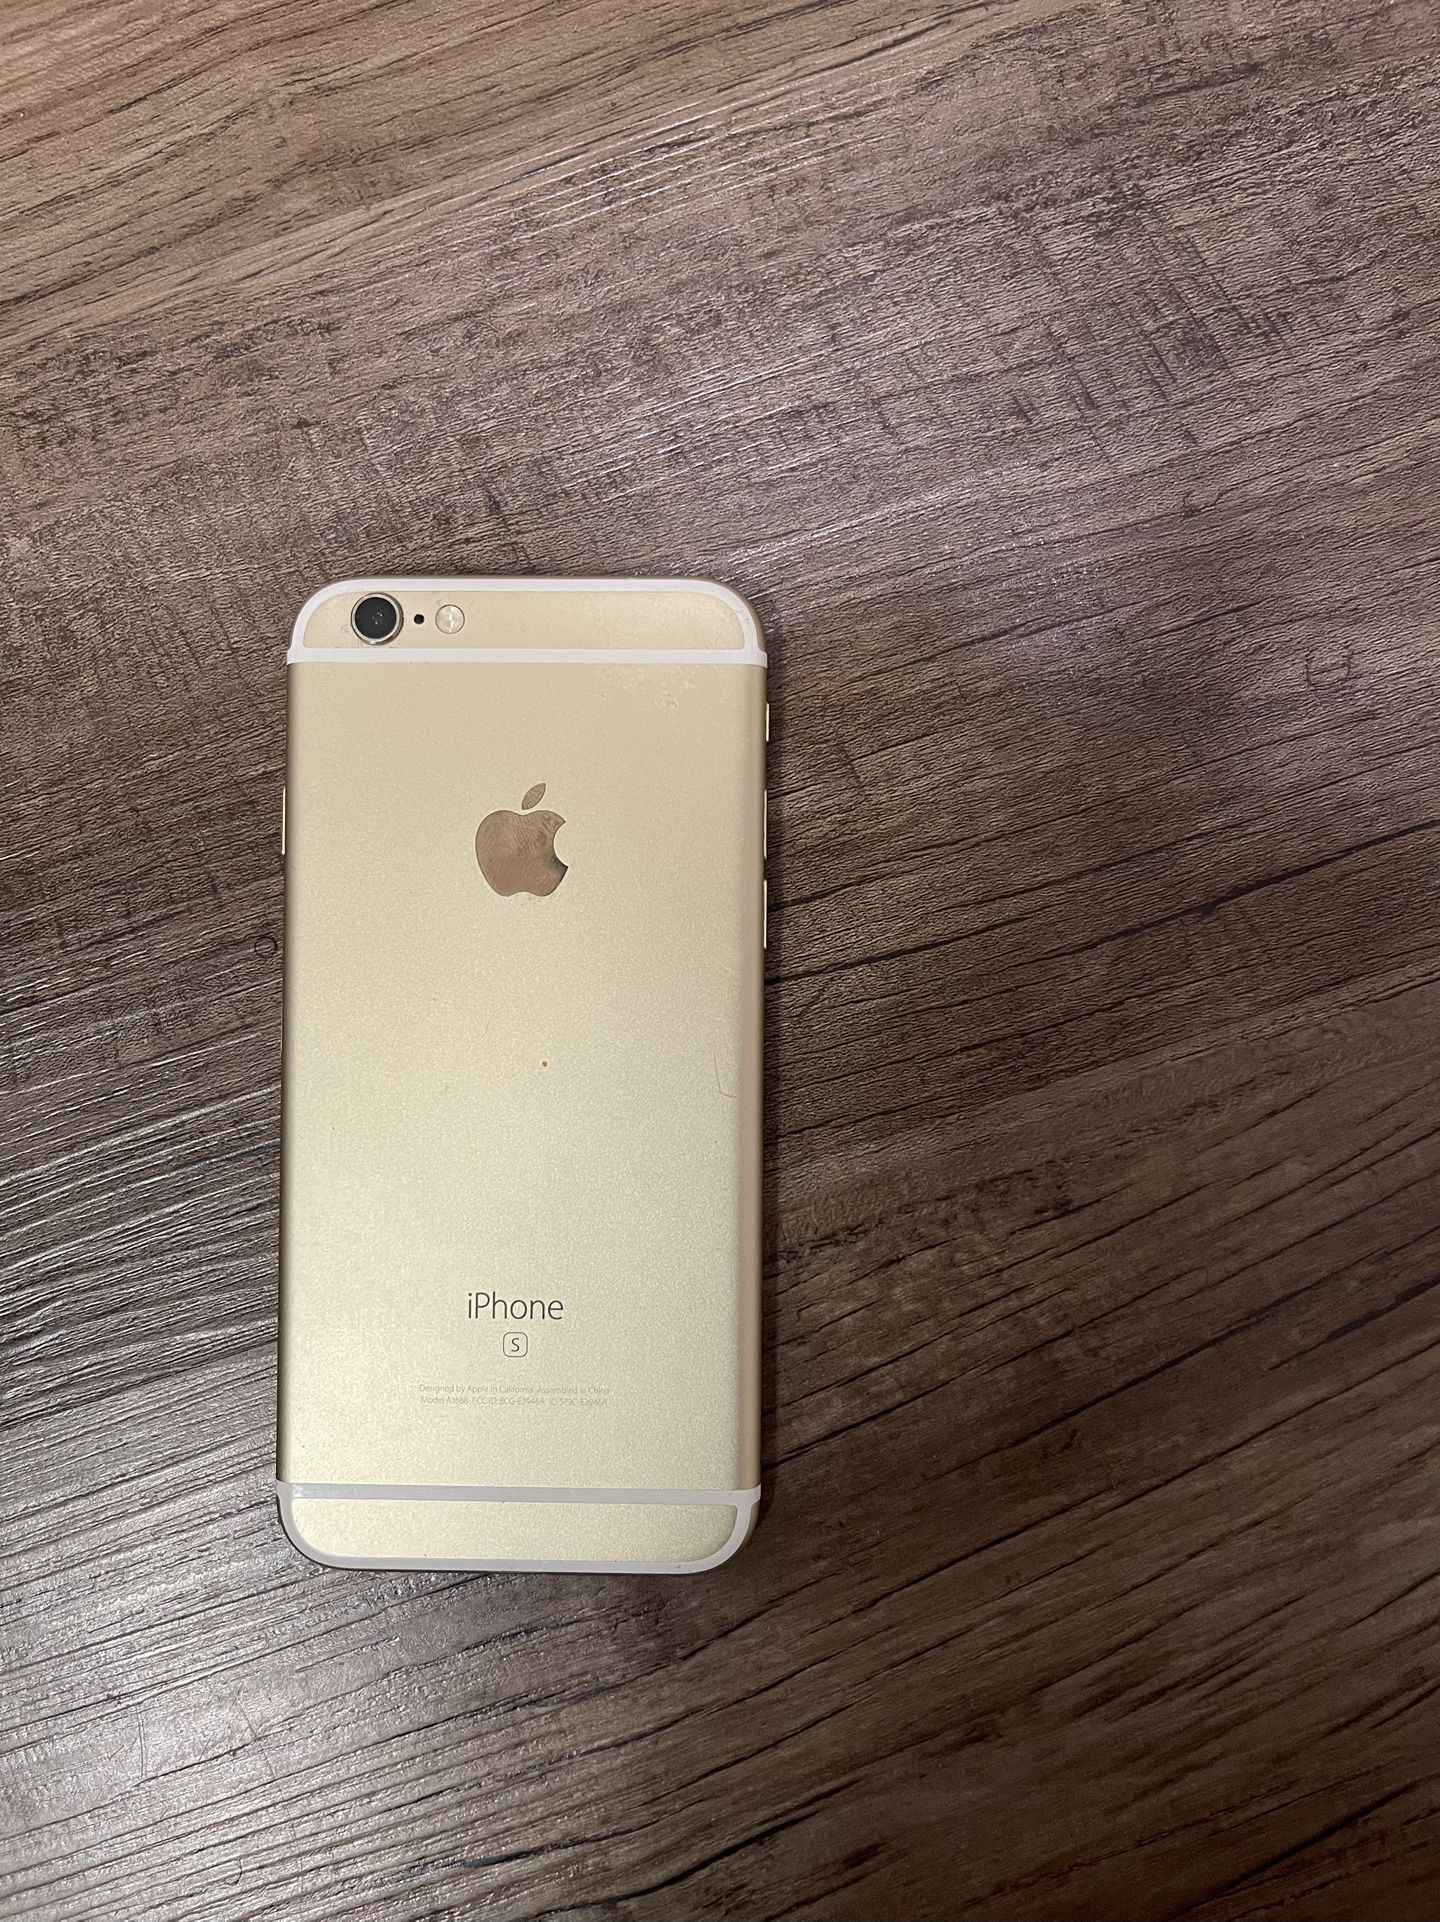 Broken iPhone 6s - Gold - Selling For Parts